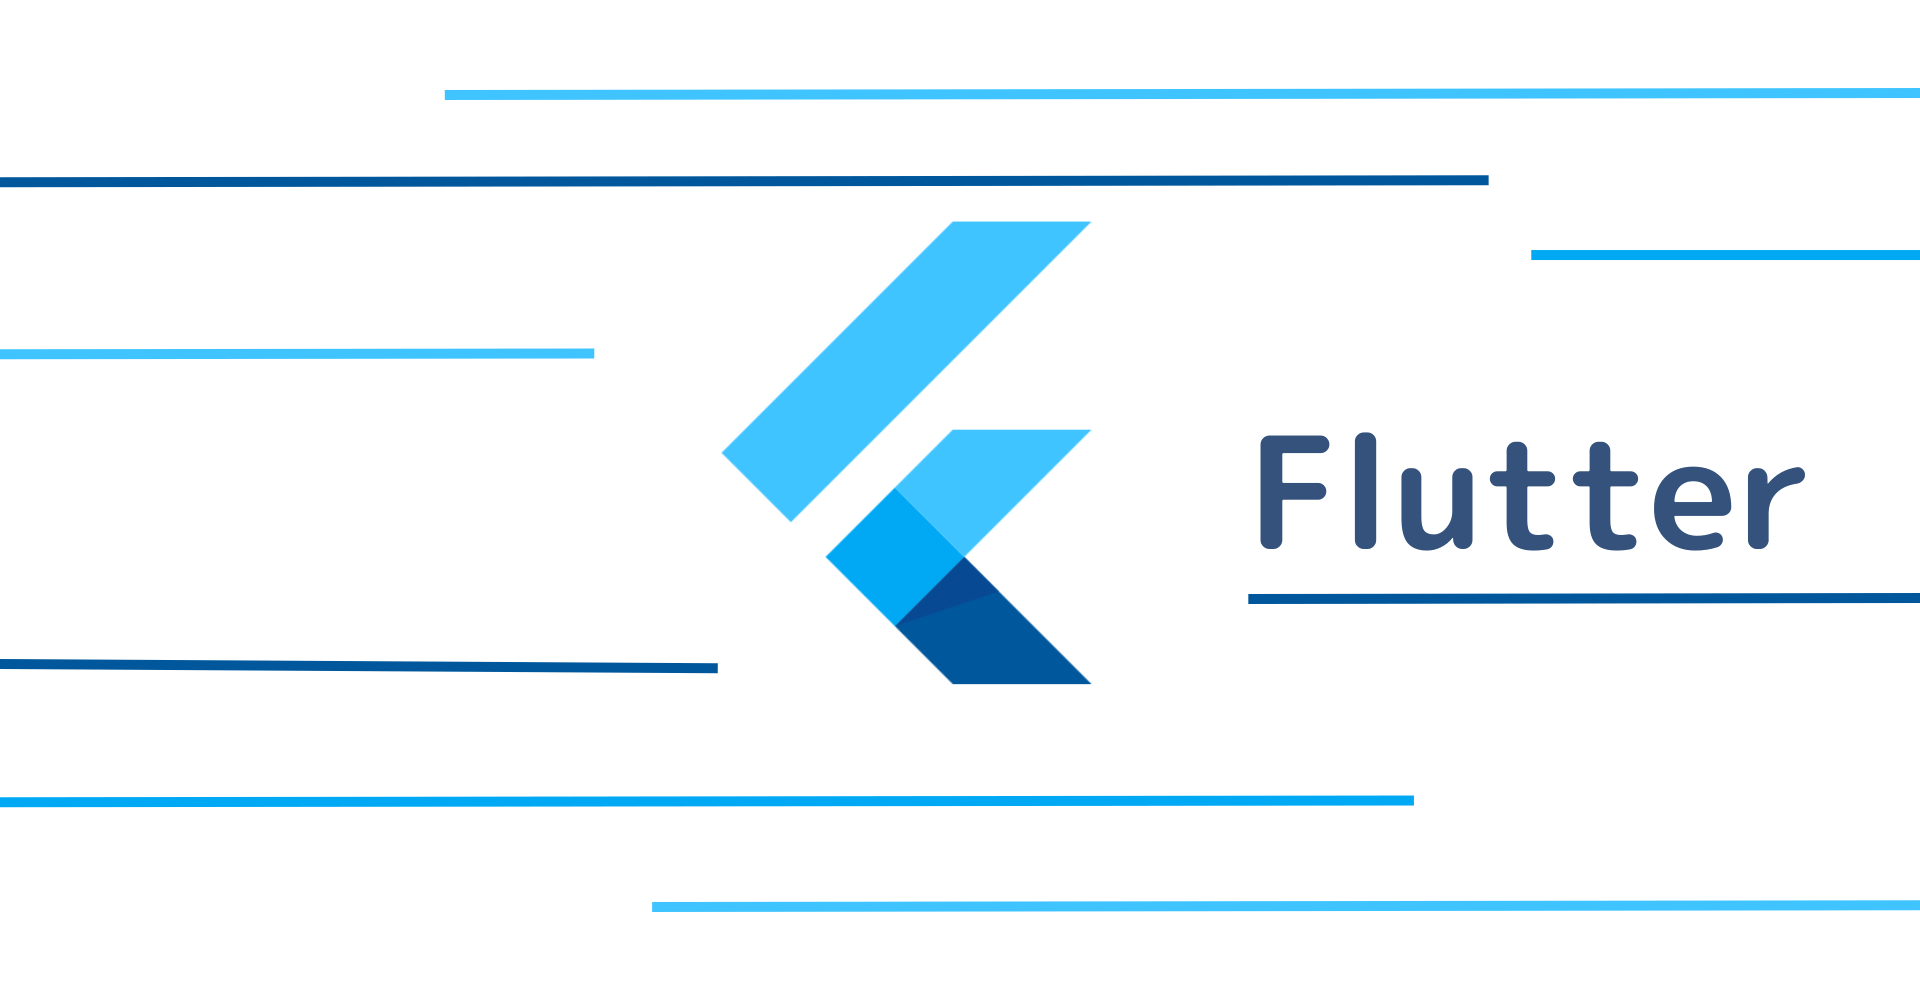 【Mac/Flutter】Android license status unknownの解決方法！